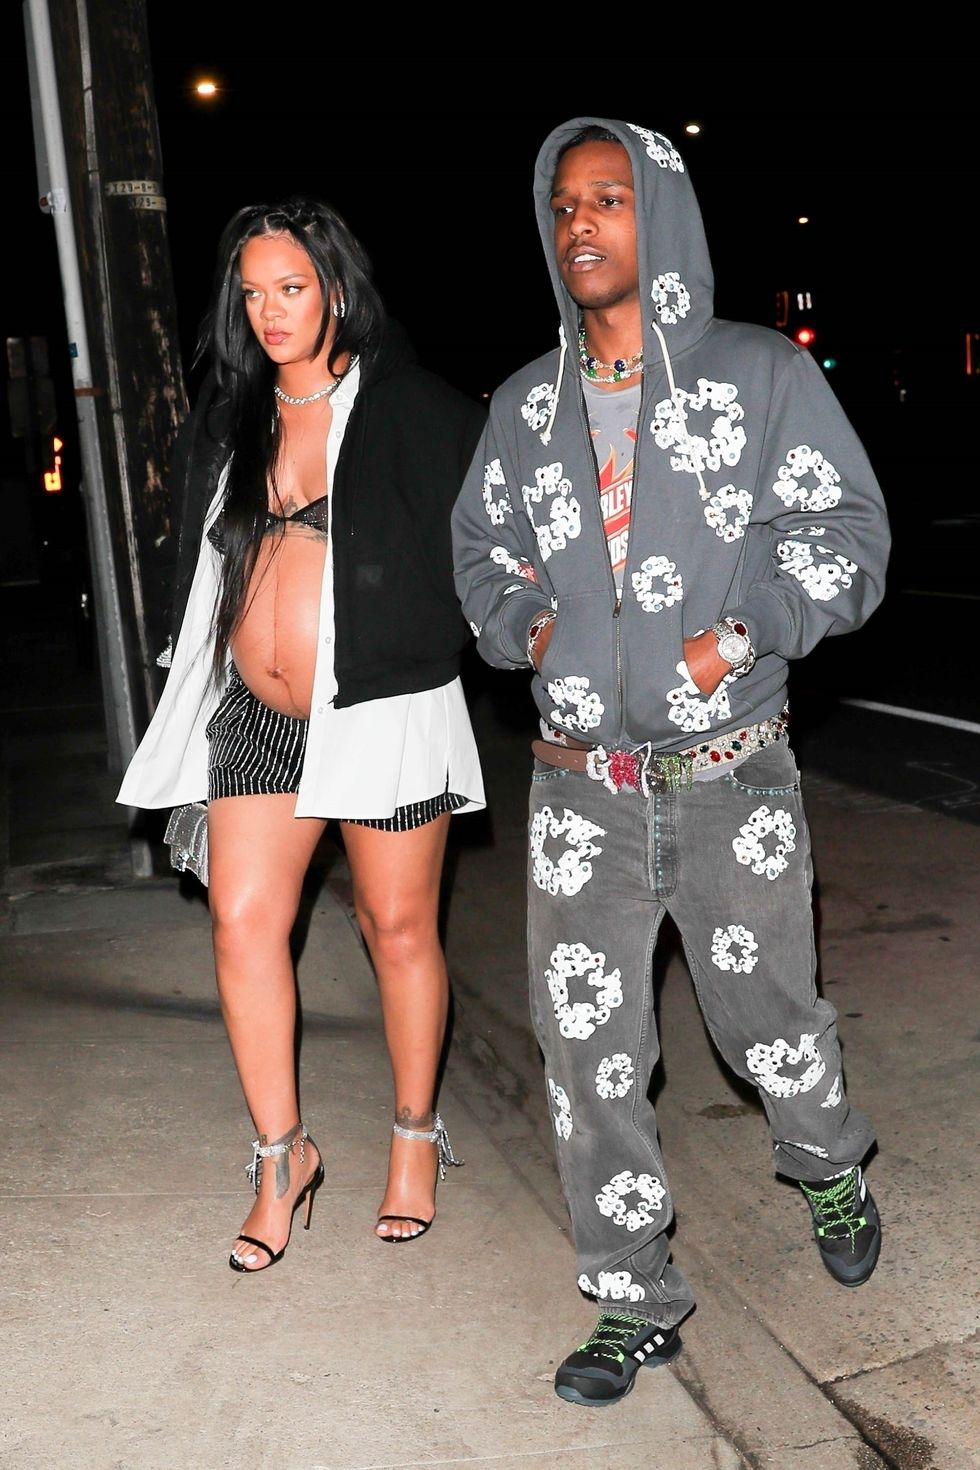 Rihanna Might Have Found The Most Perfect Clothing Item For Her Baby: Photo  4733179, Rihanna Photos